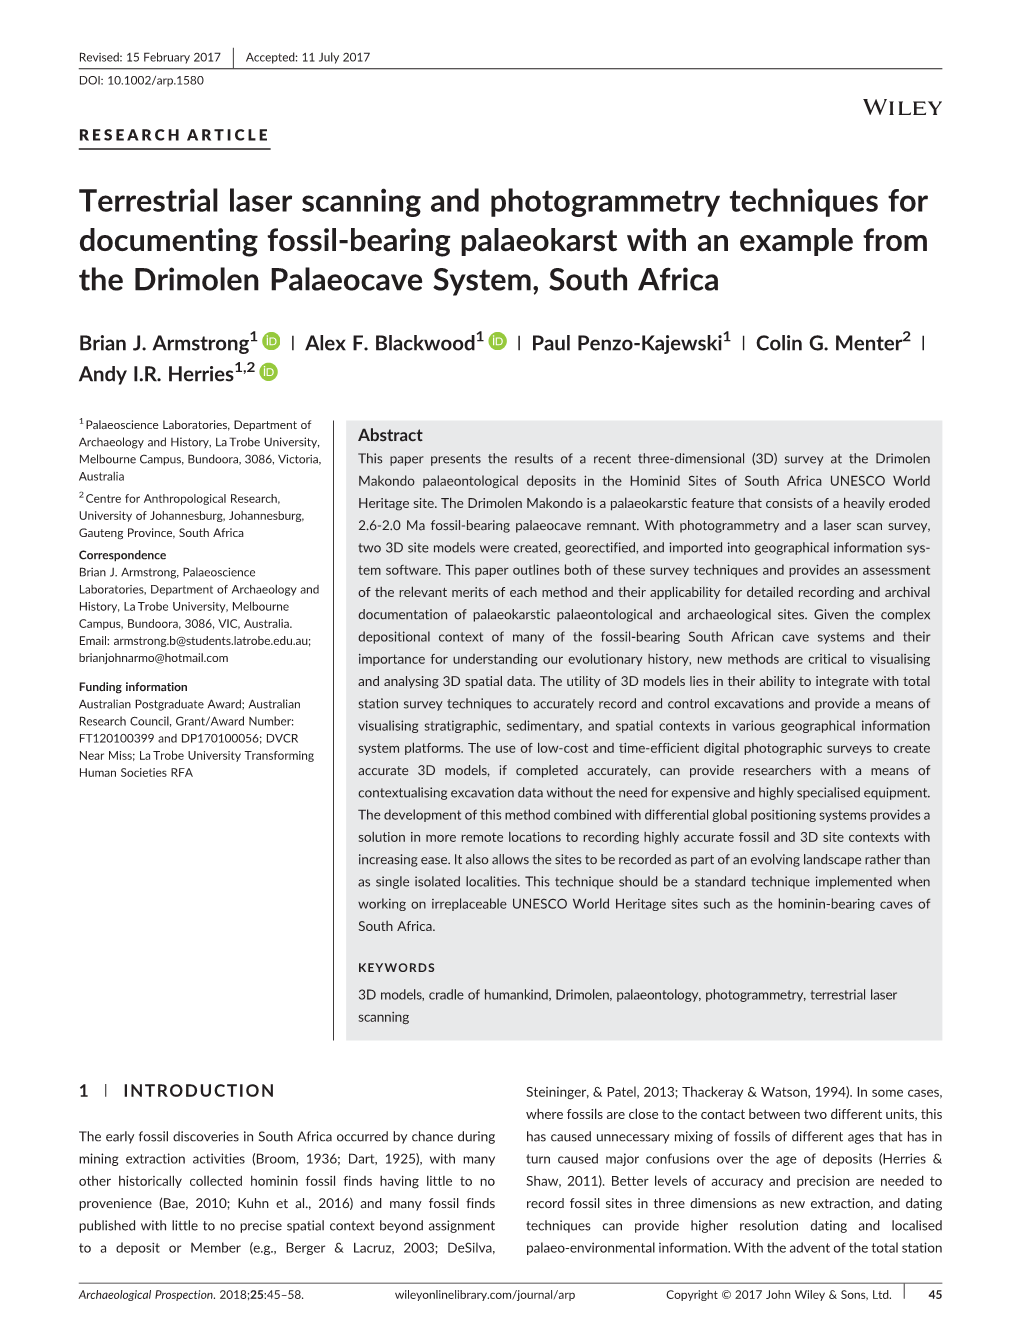 Terrestrial Laser Scanning and Photogrammetry Techniques for Documenting Fossil‐Bearing Palaeokarst with an Example from the Drimolen Palaeocave System, South Africa